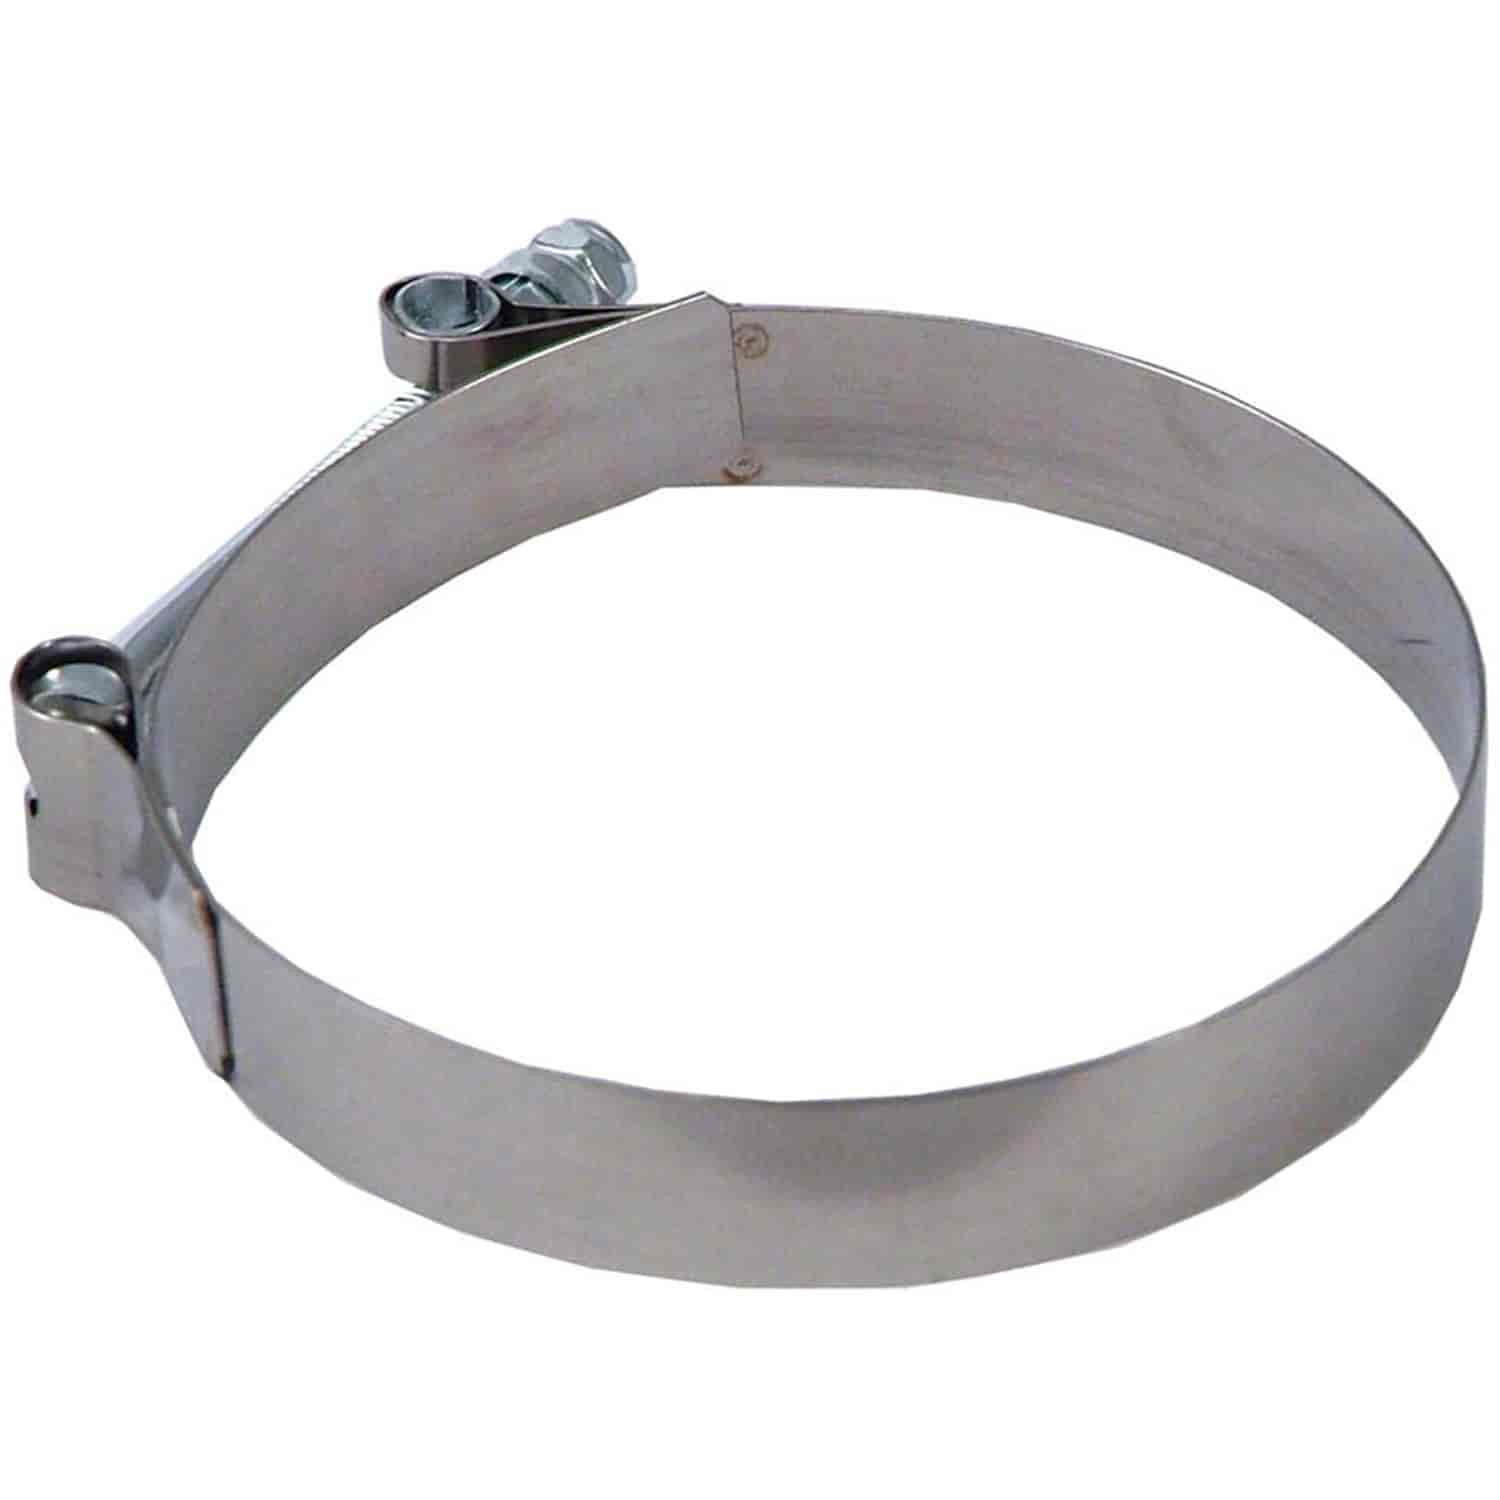 Universal T-Bolt Clamp Fits 3.5" Tubing Stainless Steel